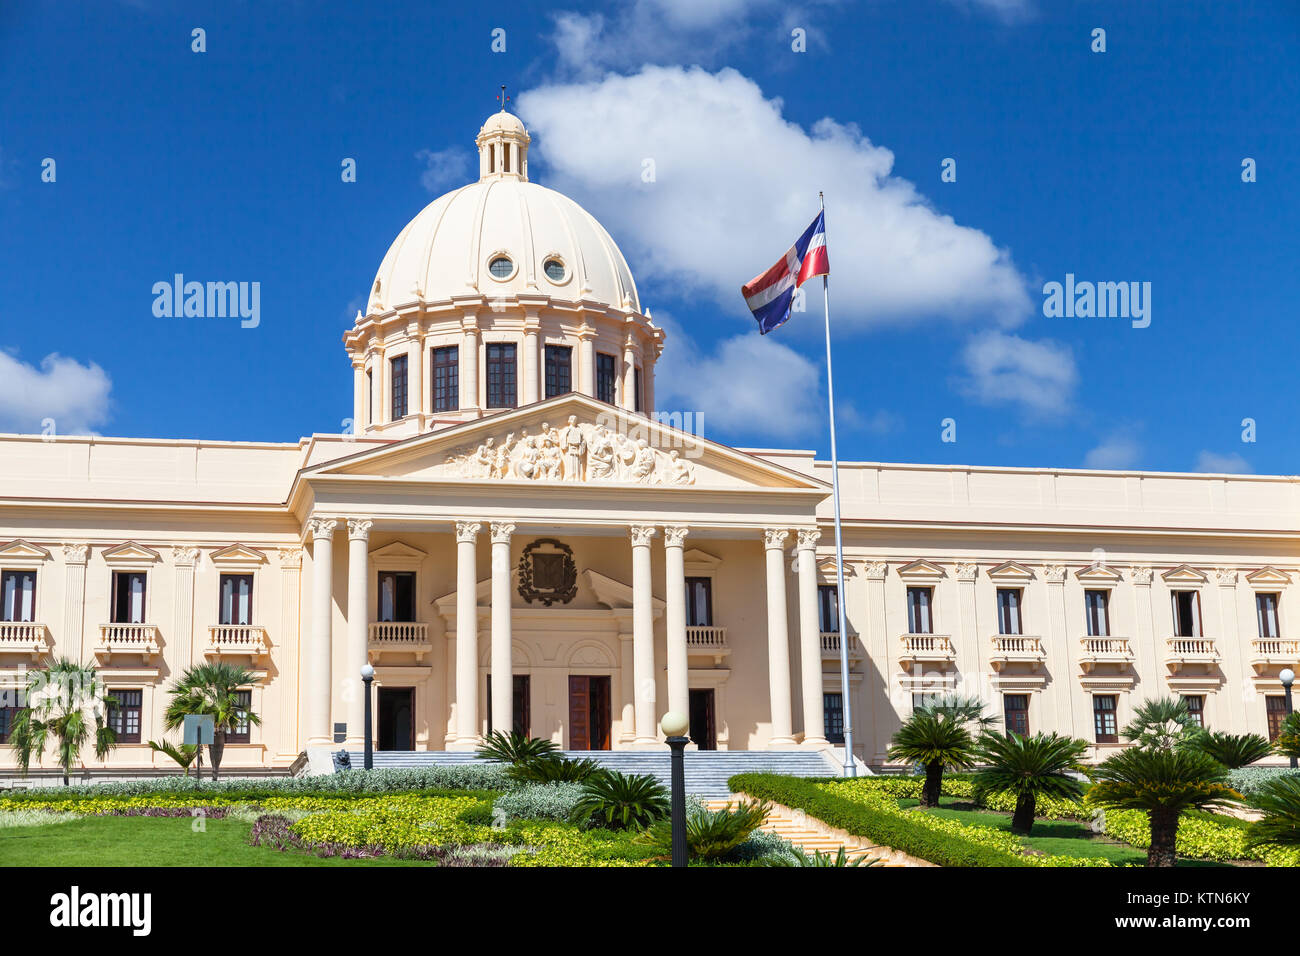 The National Palace, Santo Domingo, capital city of Dominican Republic Stock Photo